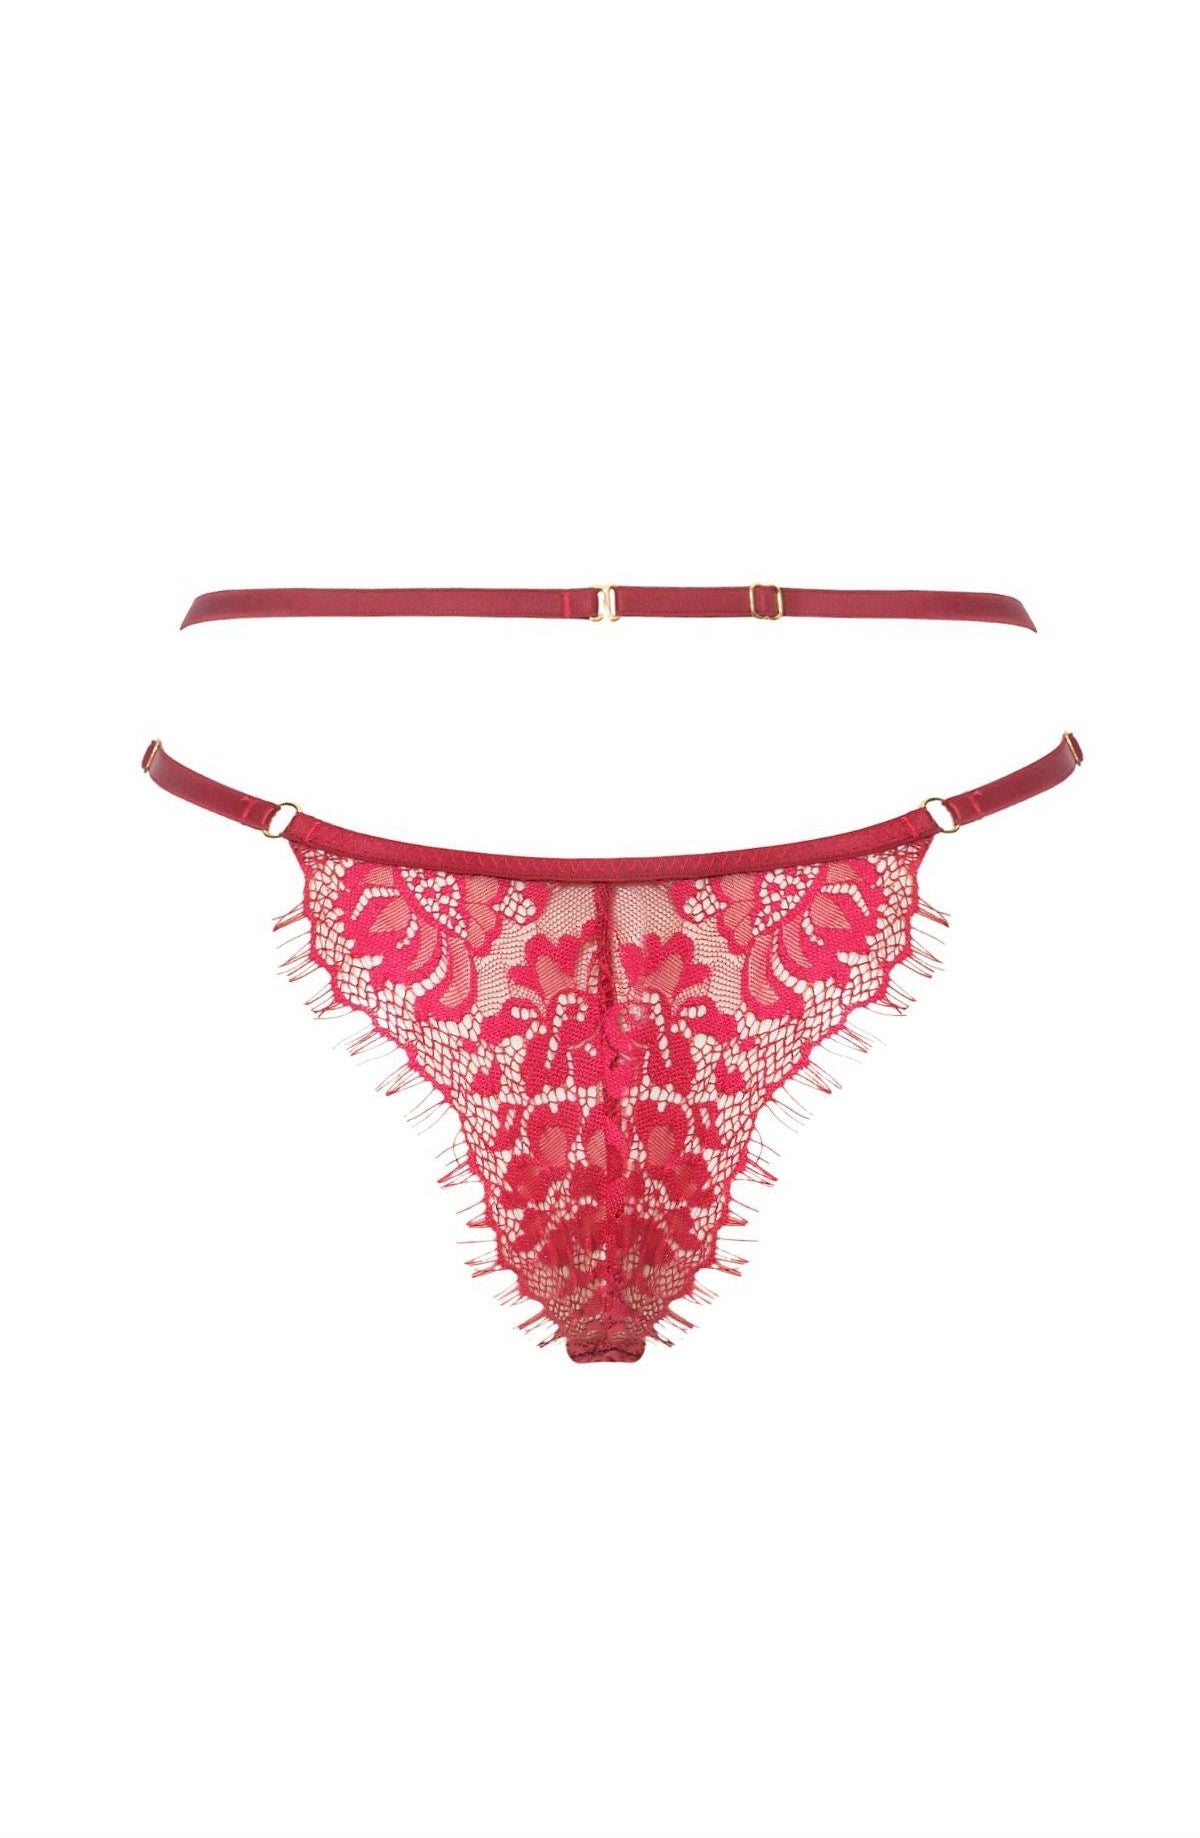 Confidante Forever Young Thong Red - PureDiva